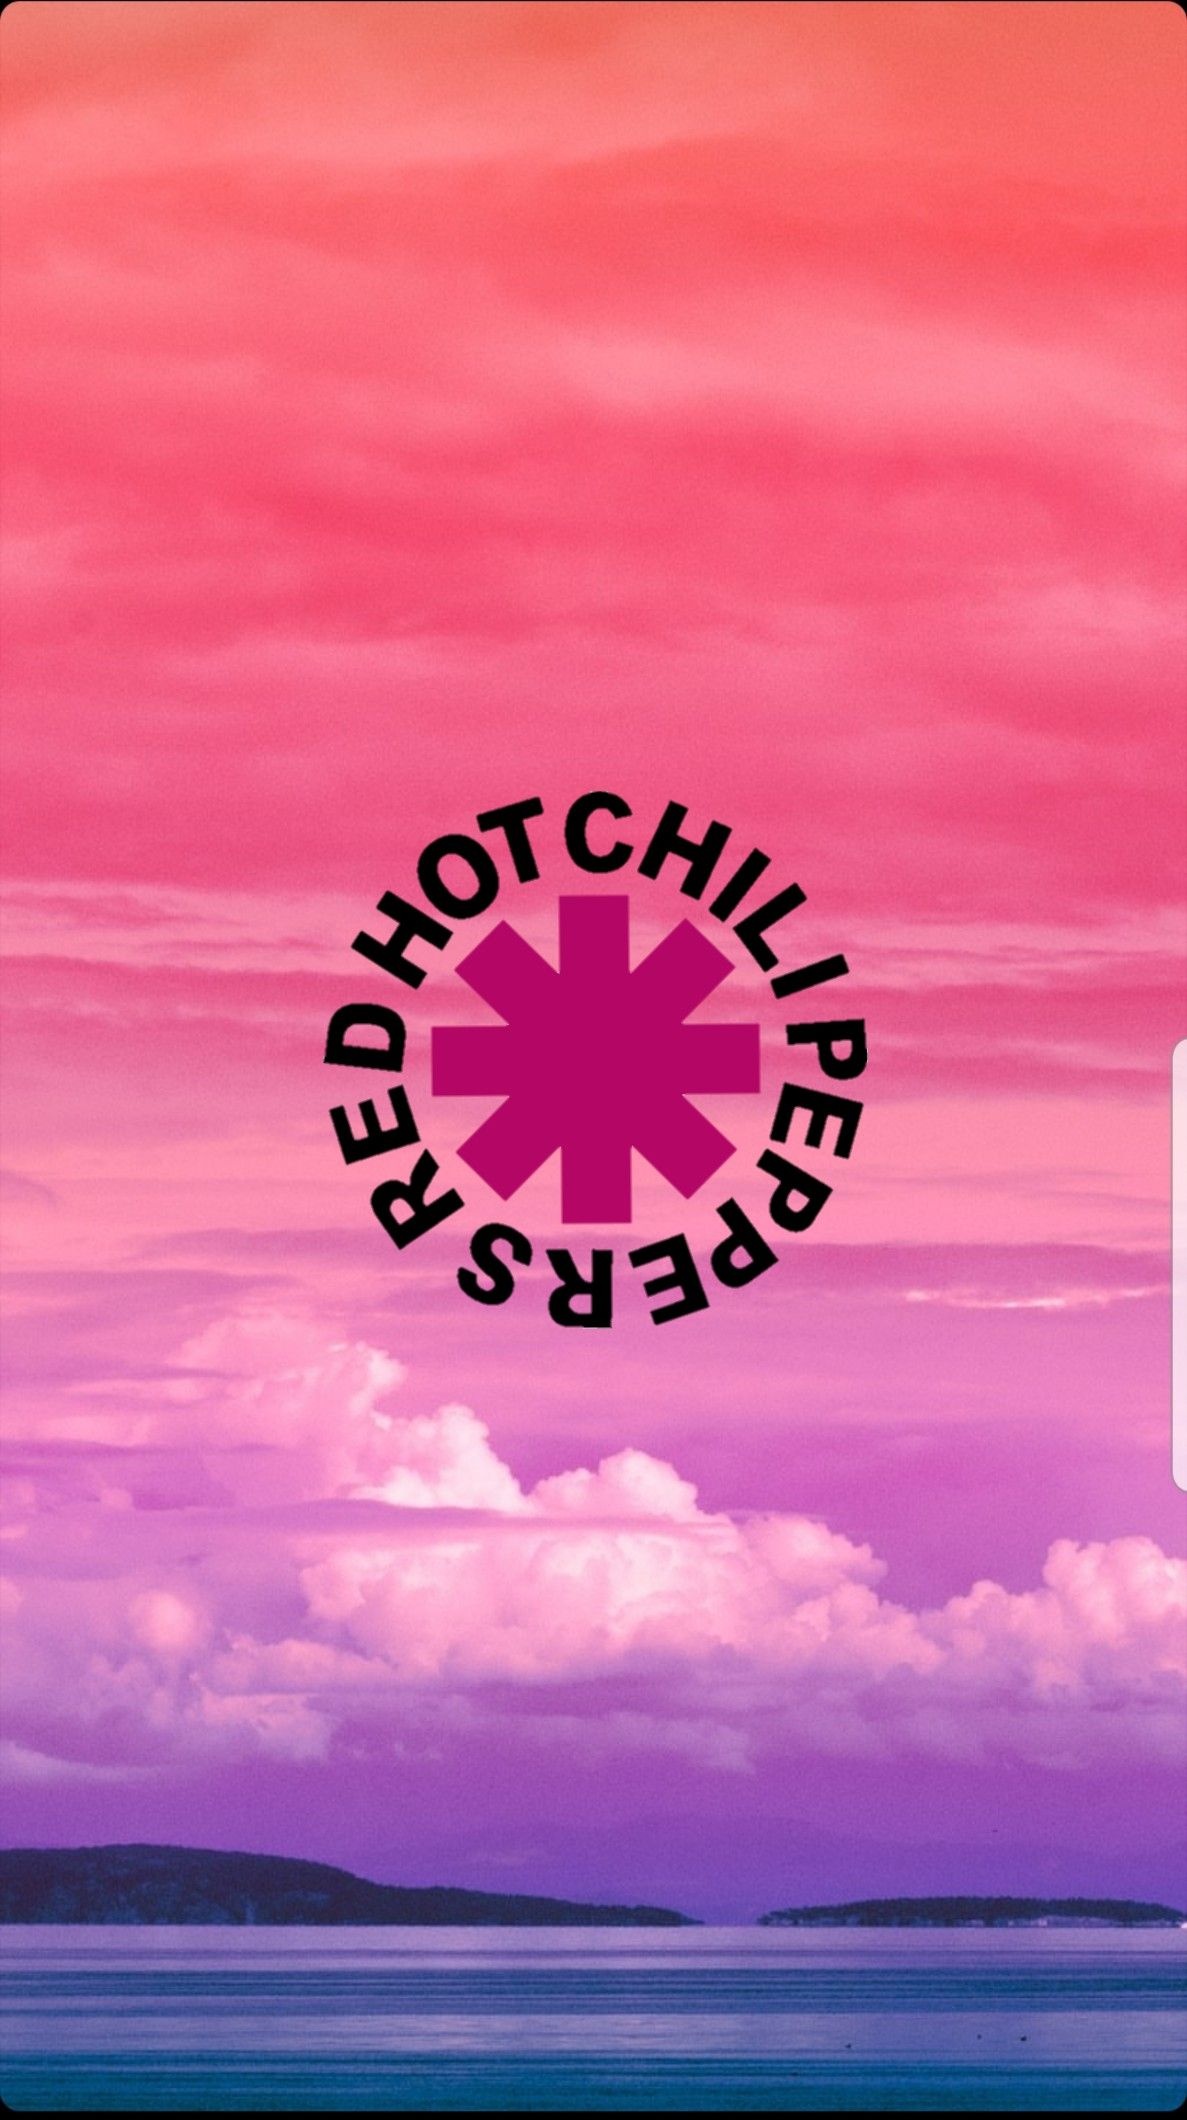 Red Hot Chili Peppers: RHCP, The band creating an intoxicating new musical style, Logo. 1190x2120 HD Background.